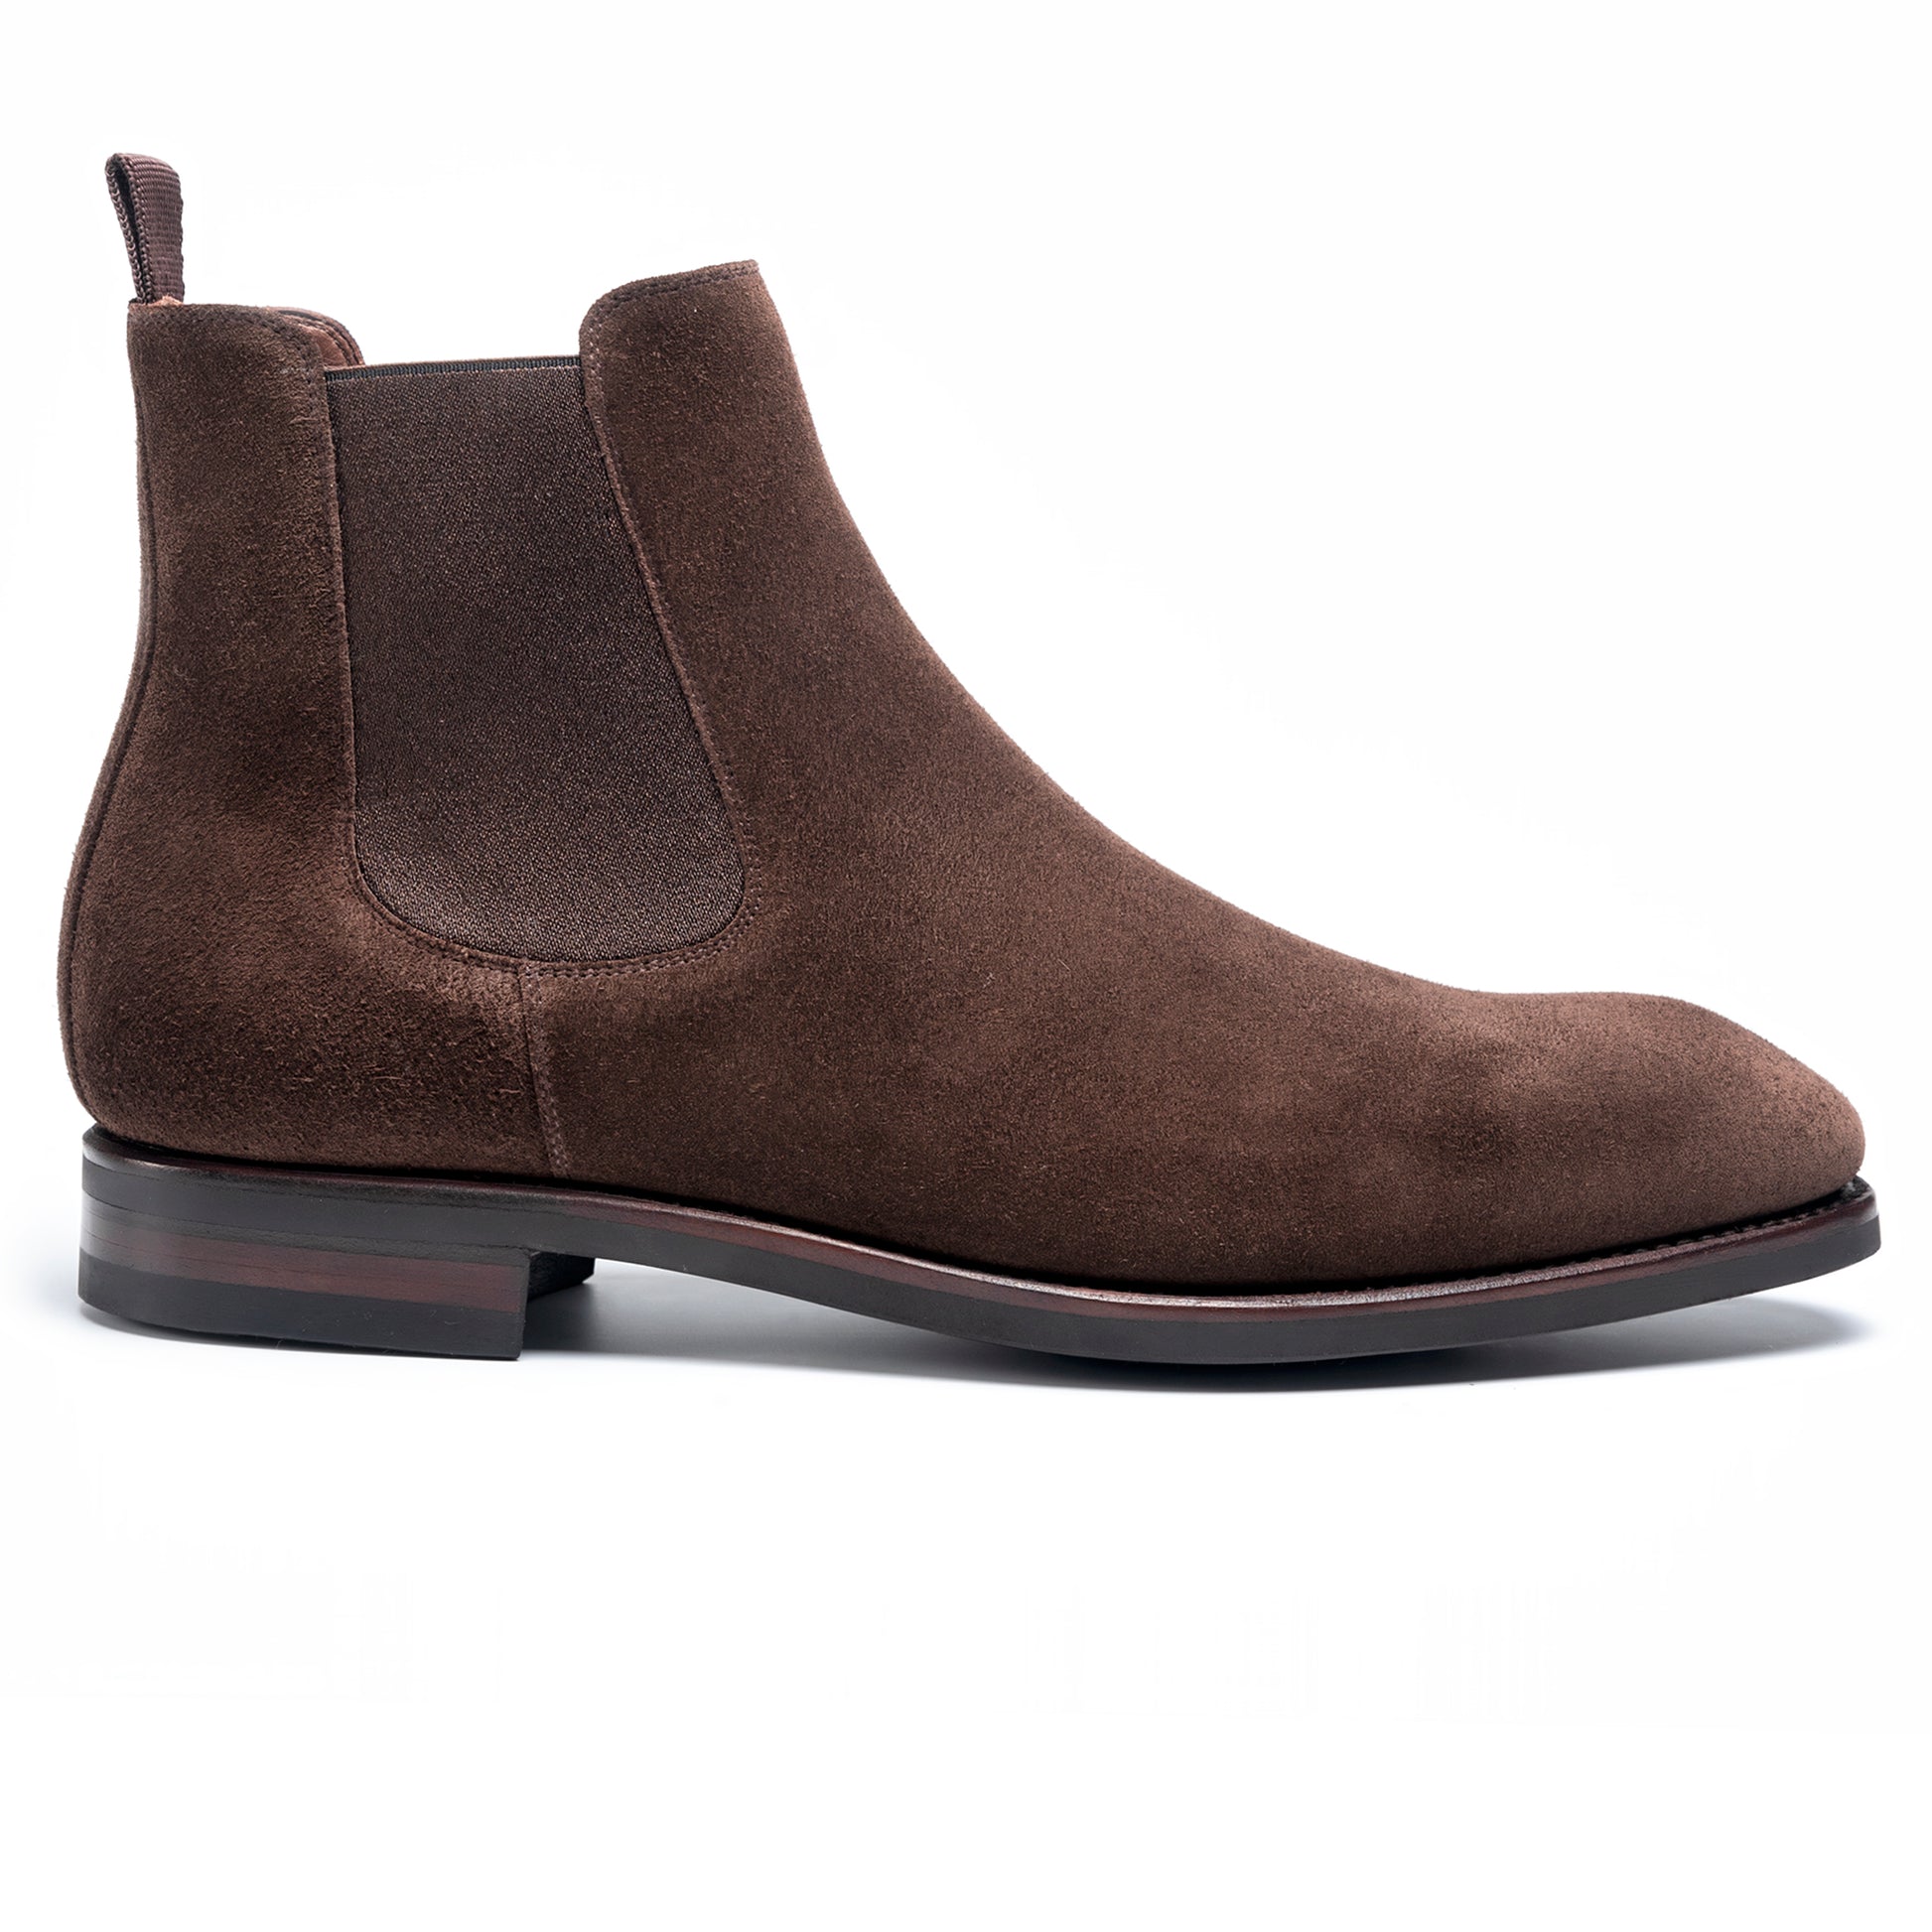 TLB Mallorca leather shoes 511 / ALAN / SUEDE BROWN